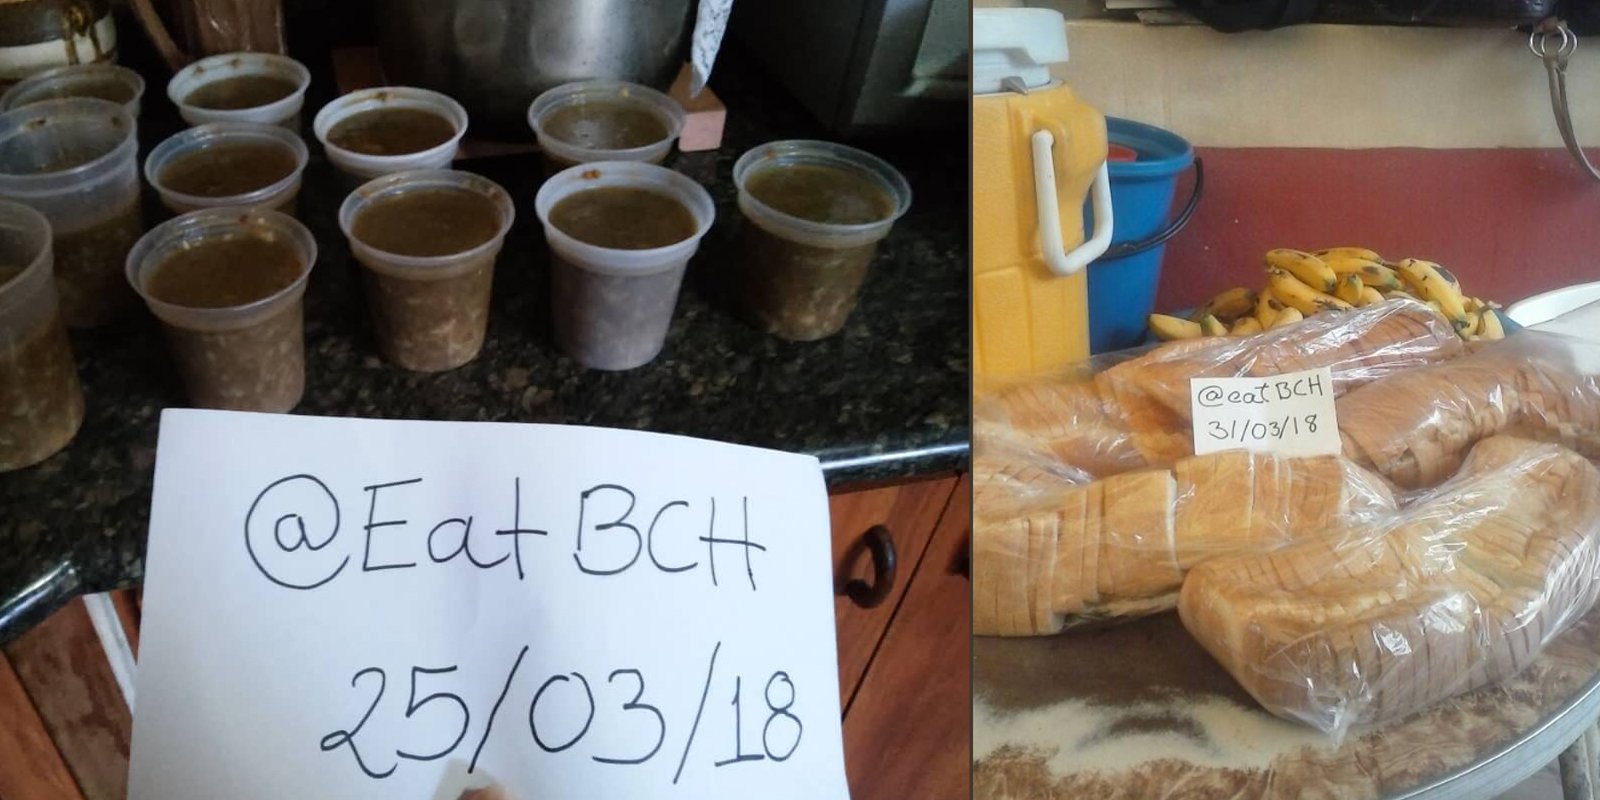 Meet the Charity 'eat BCH' the P2P Electronic Cash-to-Food System